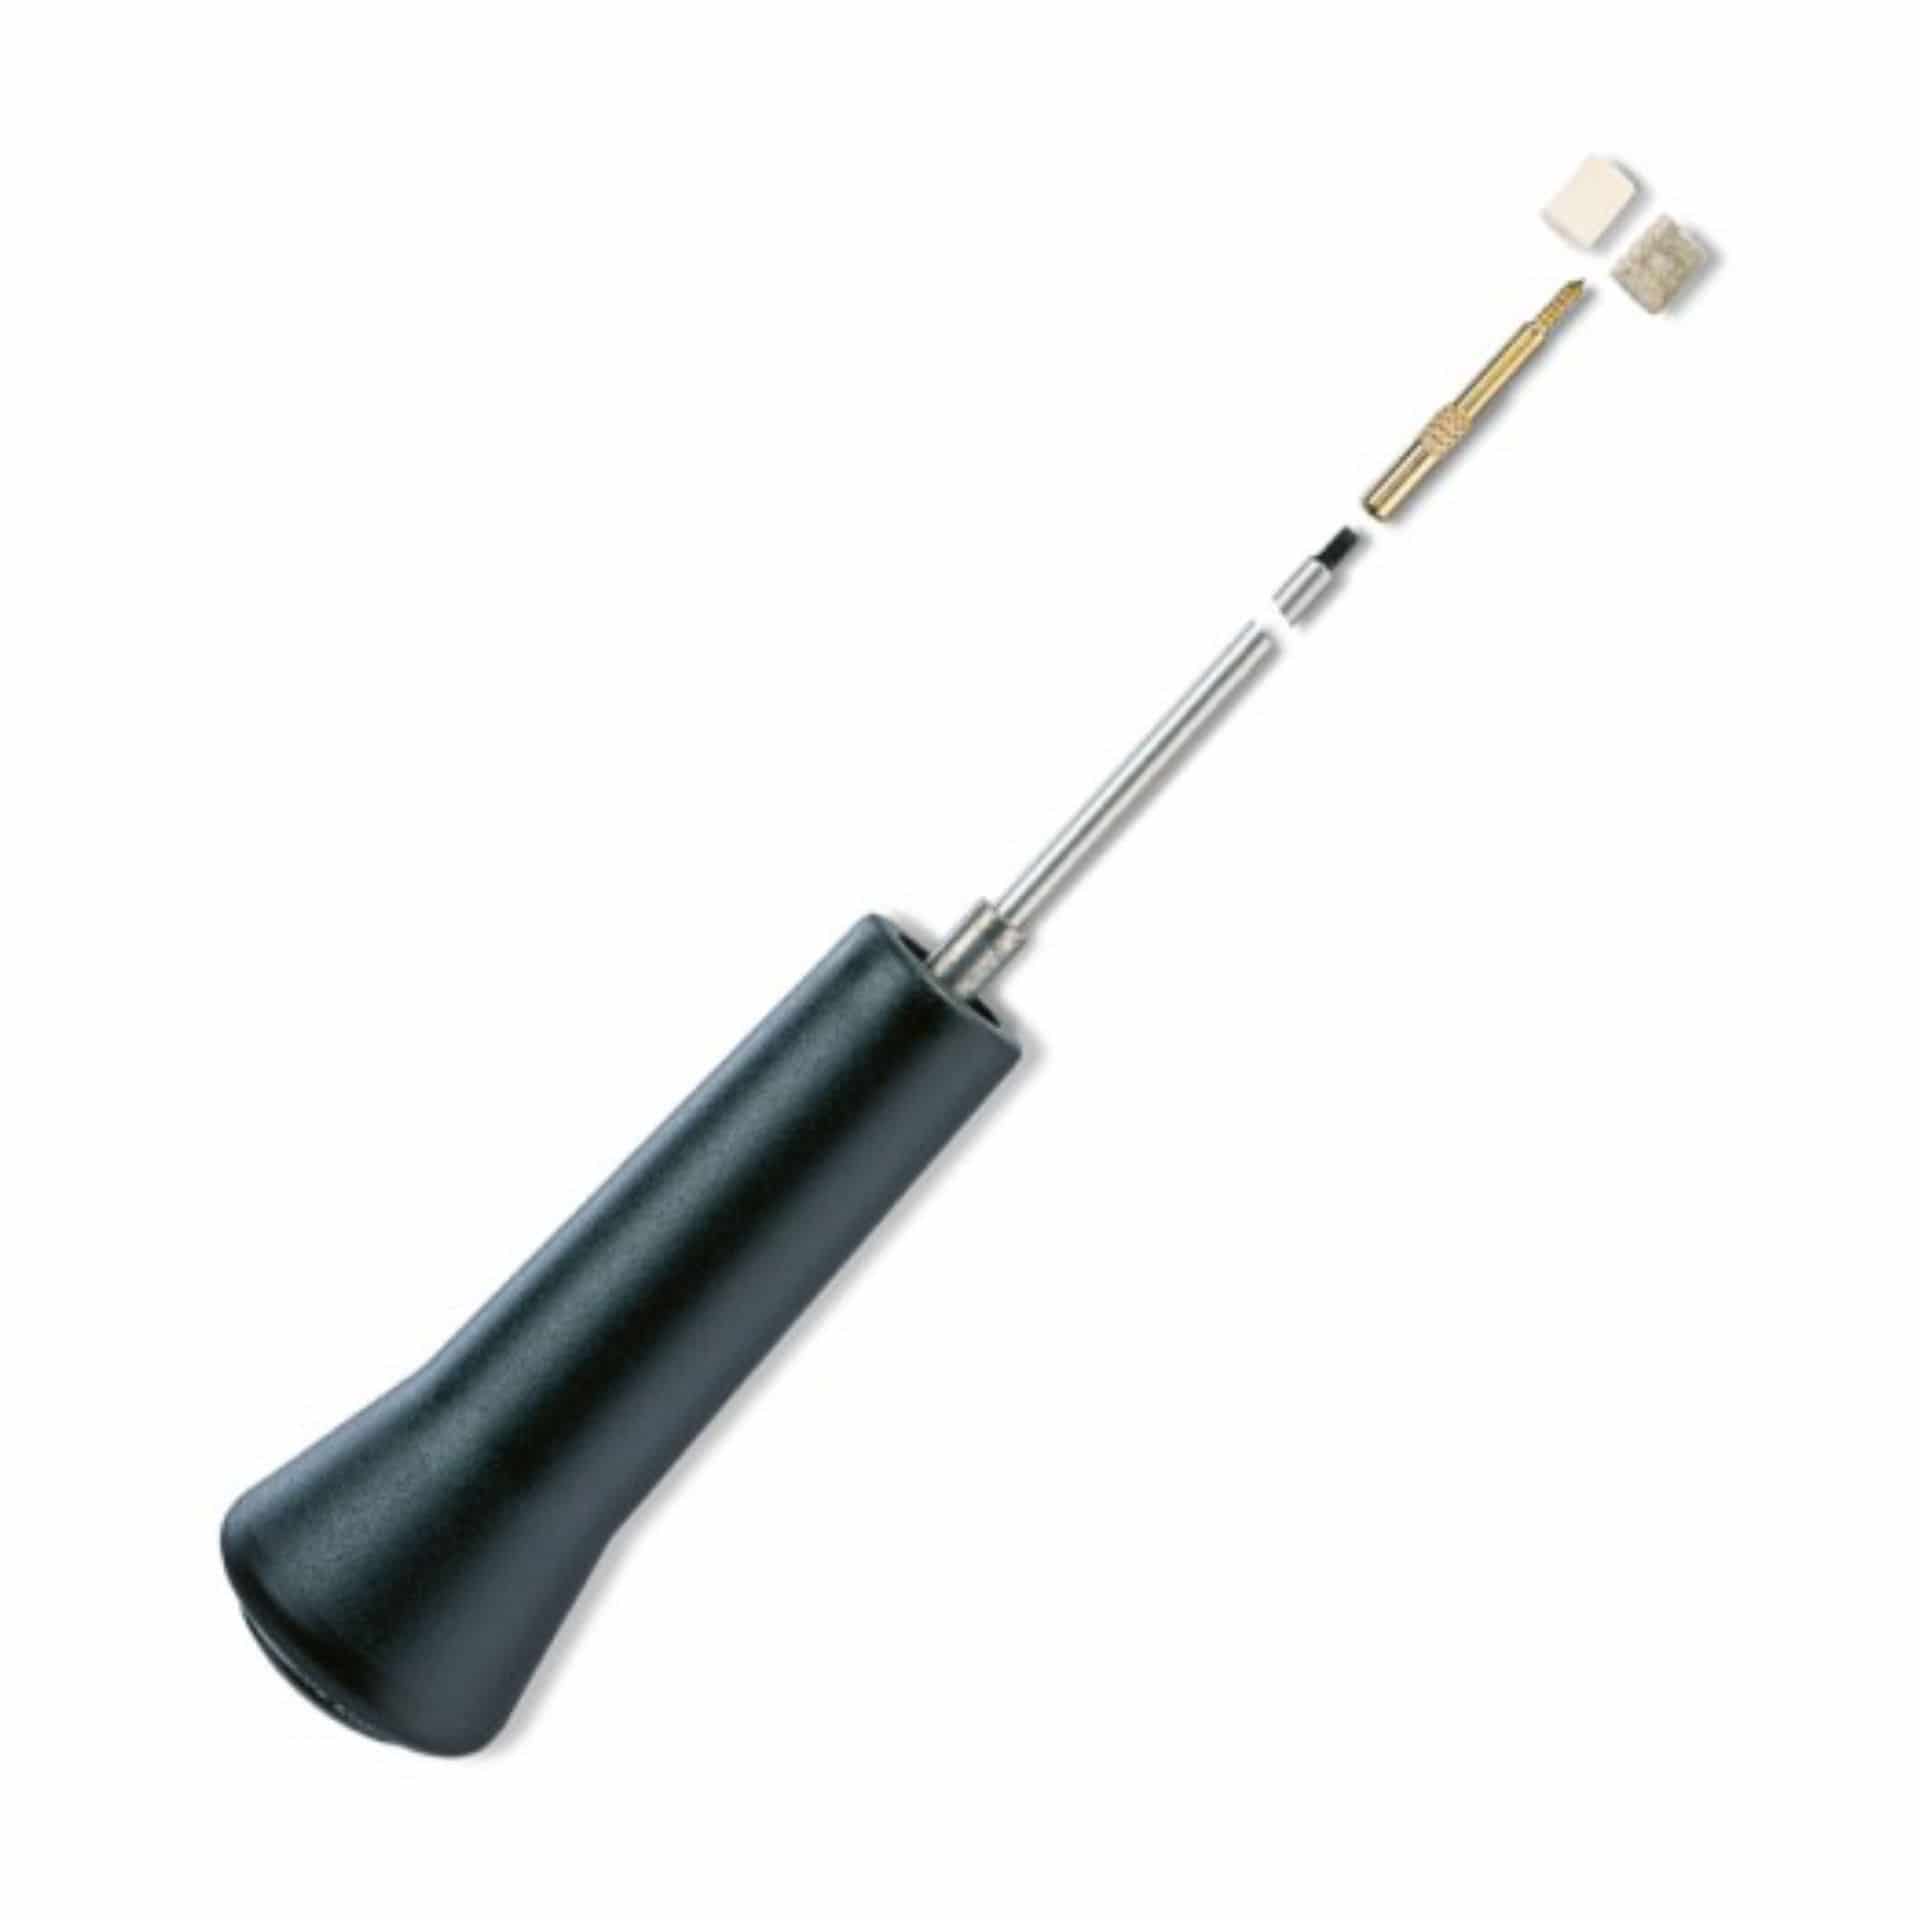 361323 VFG Cleaning Stick Stainless Stell Short 280 mm incl. adapter 66803, 4–5,5 mm